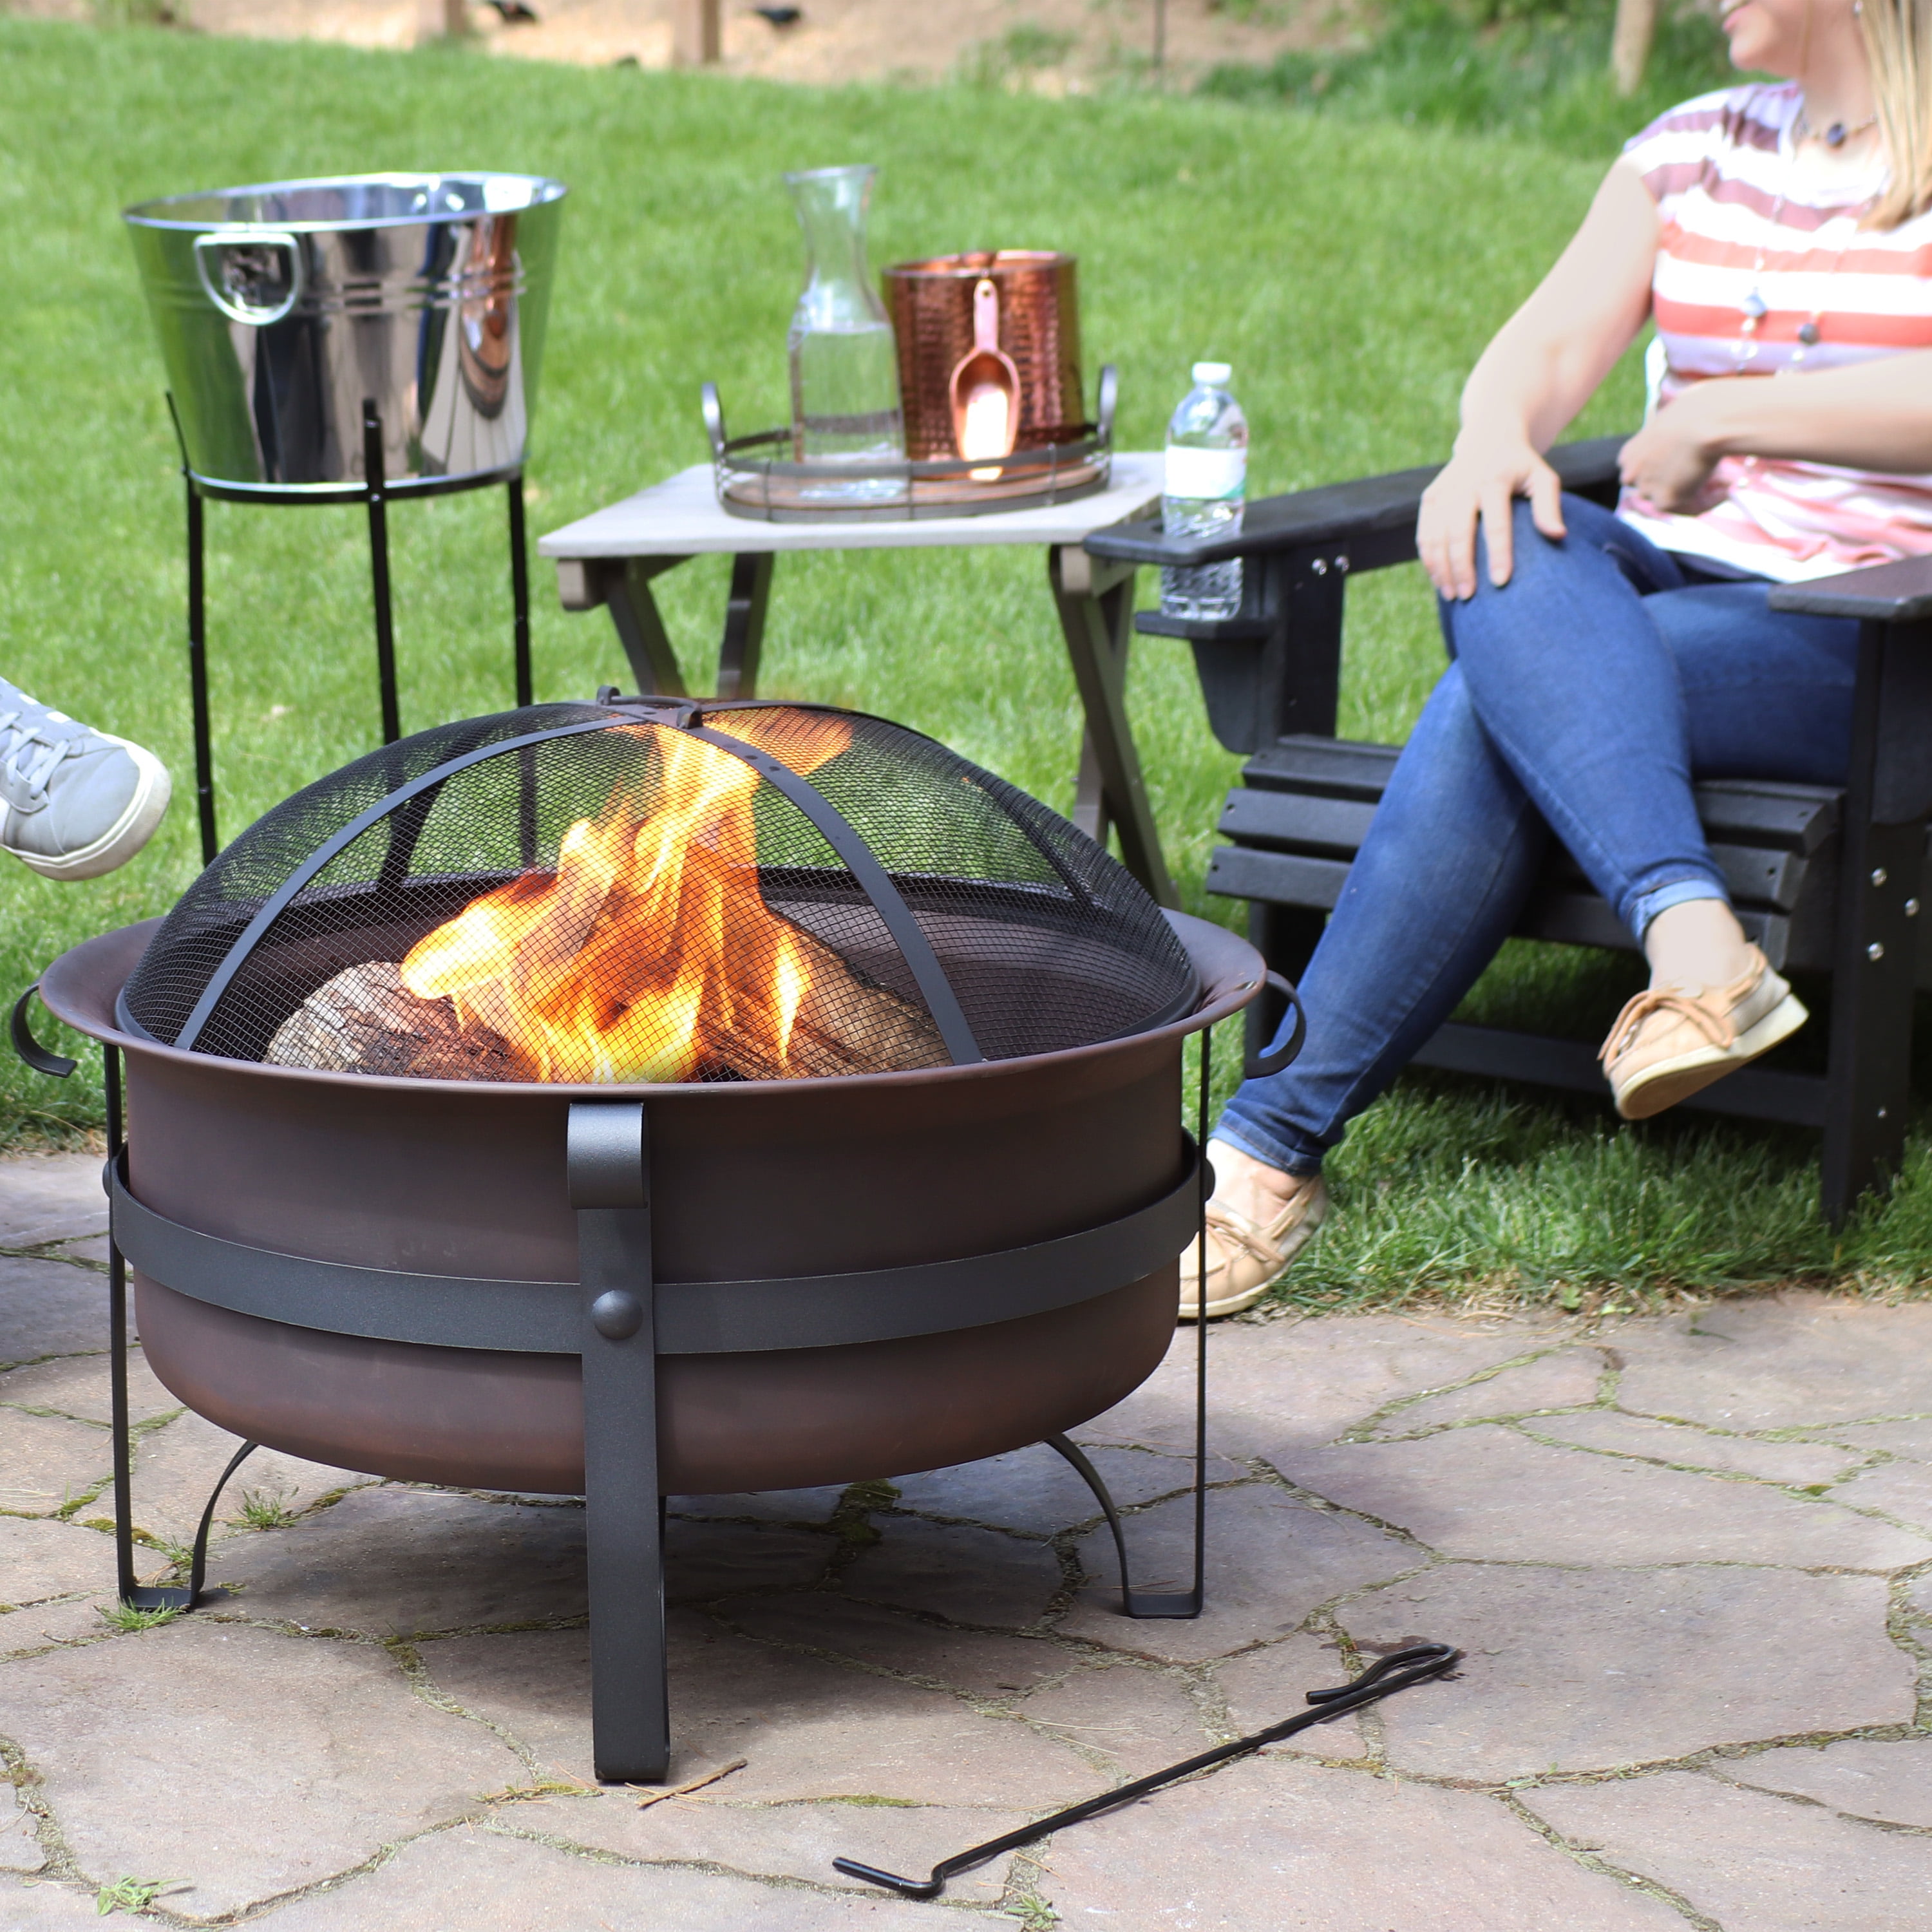 Fireplace Poker Sunnydaze Cauldron Outdoor Fire Pit 24 Inch Deep Bonfire Wood Burning Patio & Backyard Firepit for Outside with Round Spark Screen and Metal Grate 